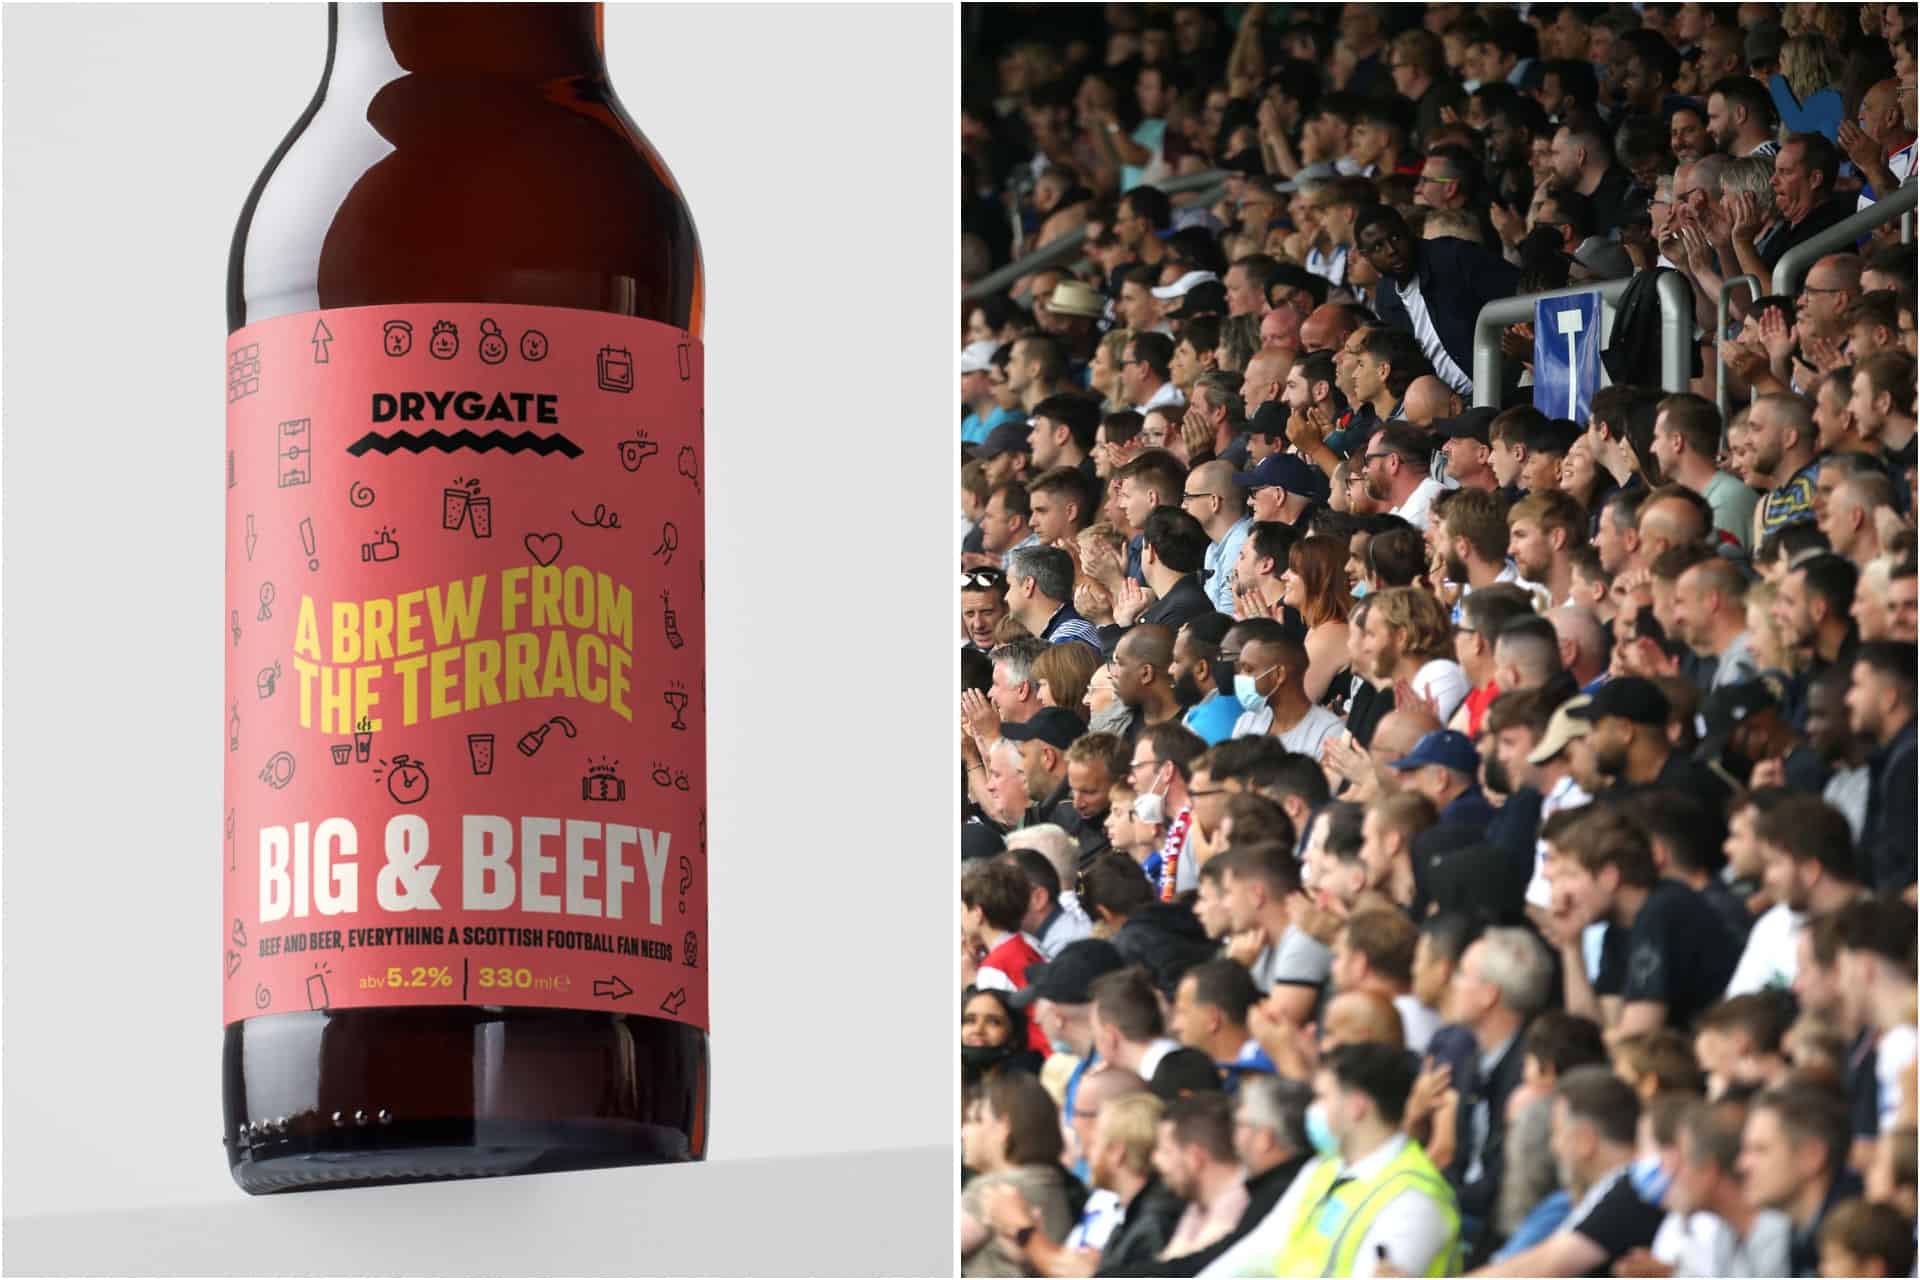 Bovril-inspired beer dubbed ‘football in a bottle’ goes on sale